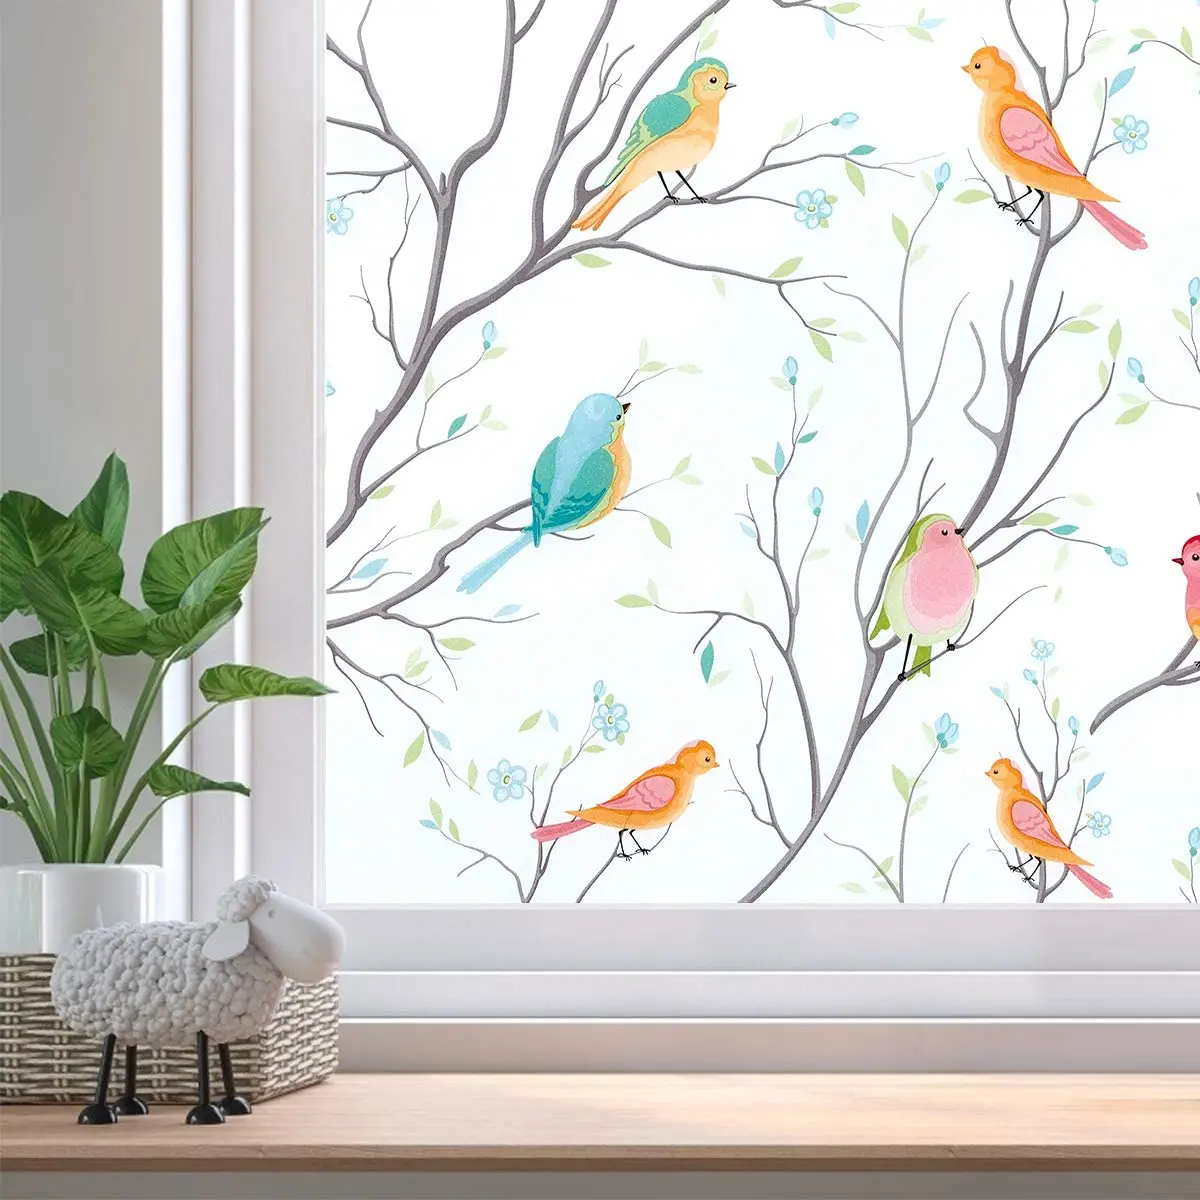 

LUCKYYJ Bird Privacy Window Film Frosted Stained Glass Film Static Cling Self Adhesive Window Stickers for Home Bathroom Office